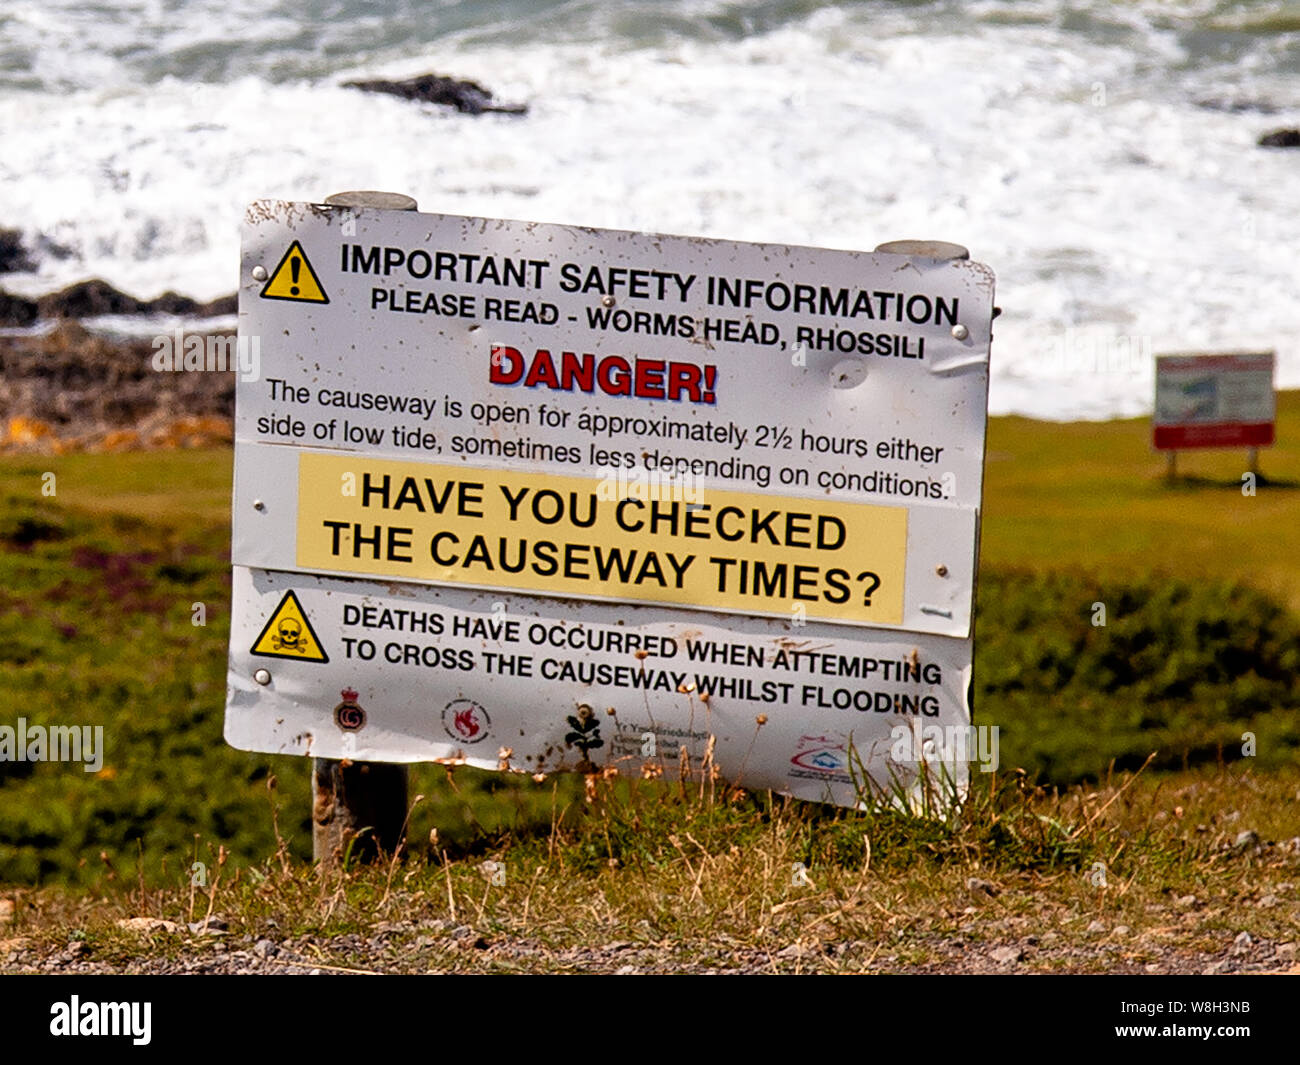 Safety warning sign for people who wish to cross the causeway to Worms Head, Rhossili. AONB, Gower, Wales, UK. Stock Photo